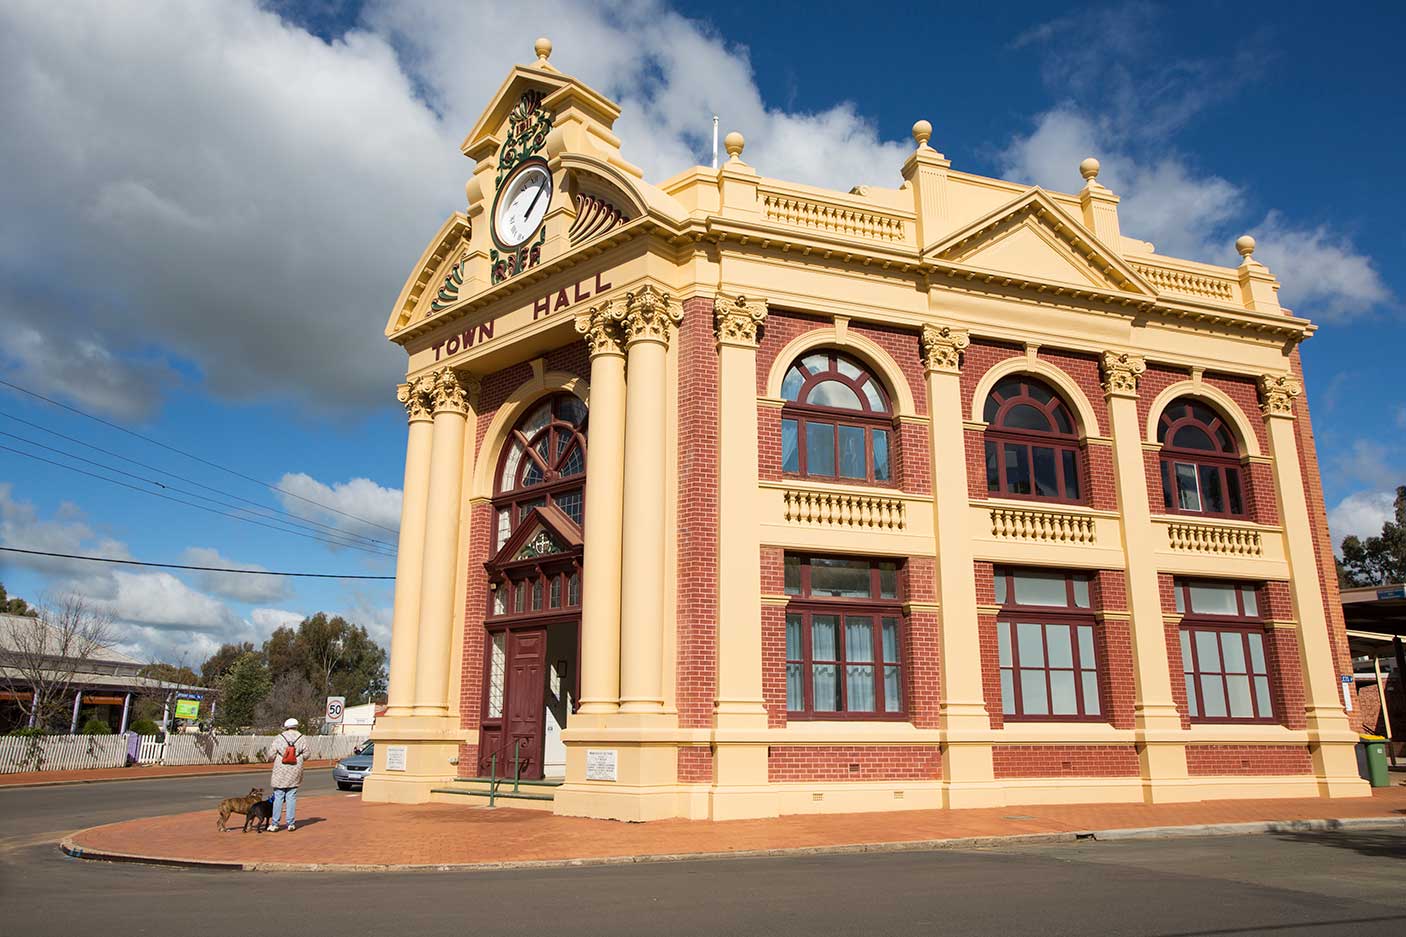 York Town Hall, built in 1911 due to the increased wealth brought on by Gold rushes in eastern areas of the state. A local stands in front of this historic building which is frequented regularly by Tourists to this picturesque town.